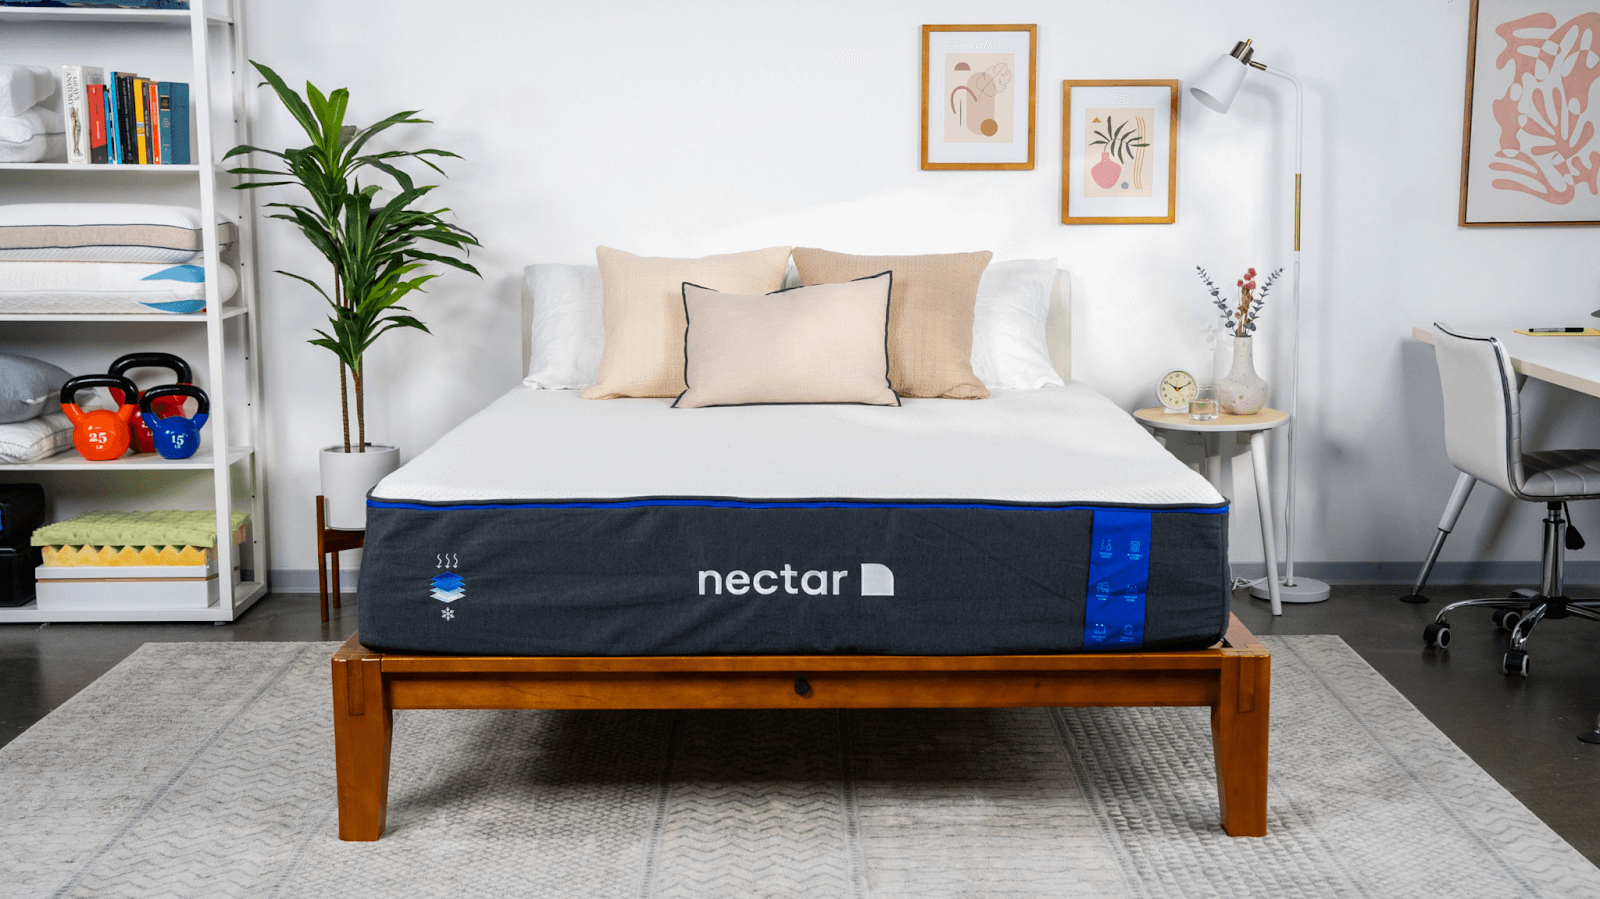 Nectar Mattress is made in China and the UK